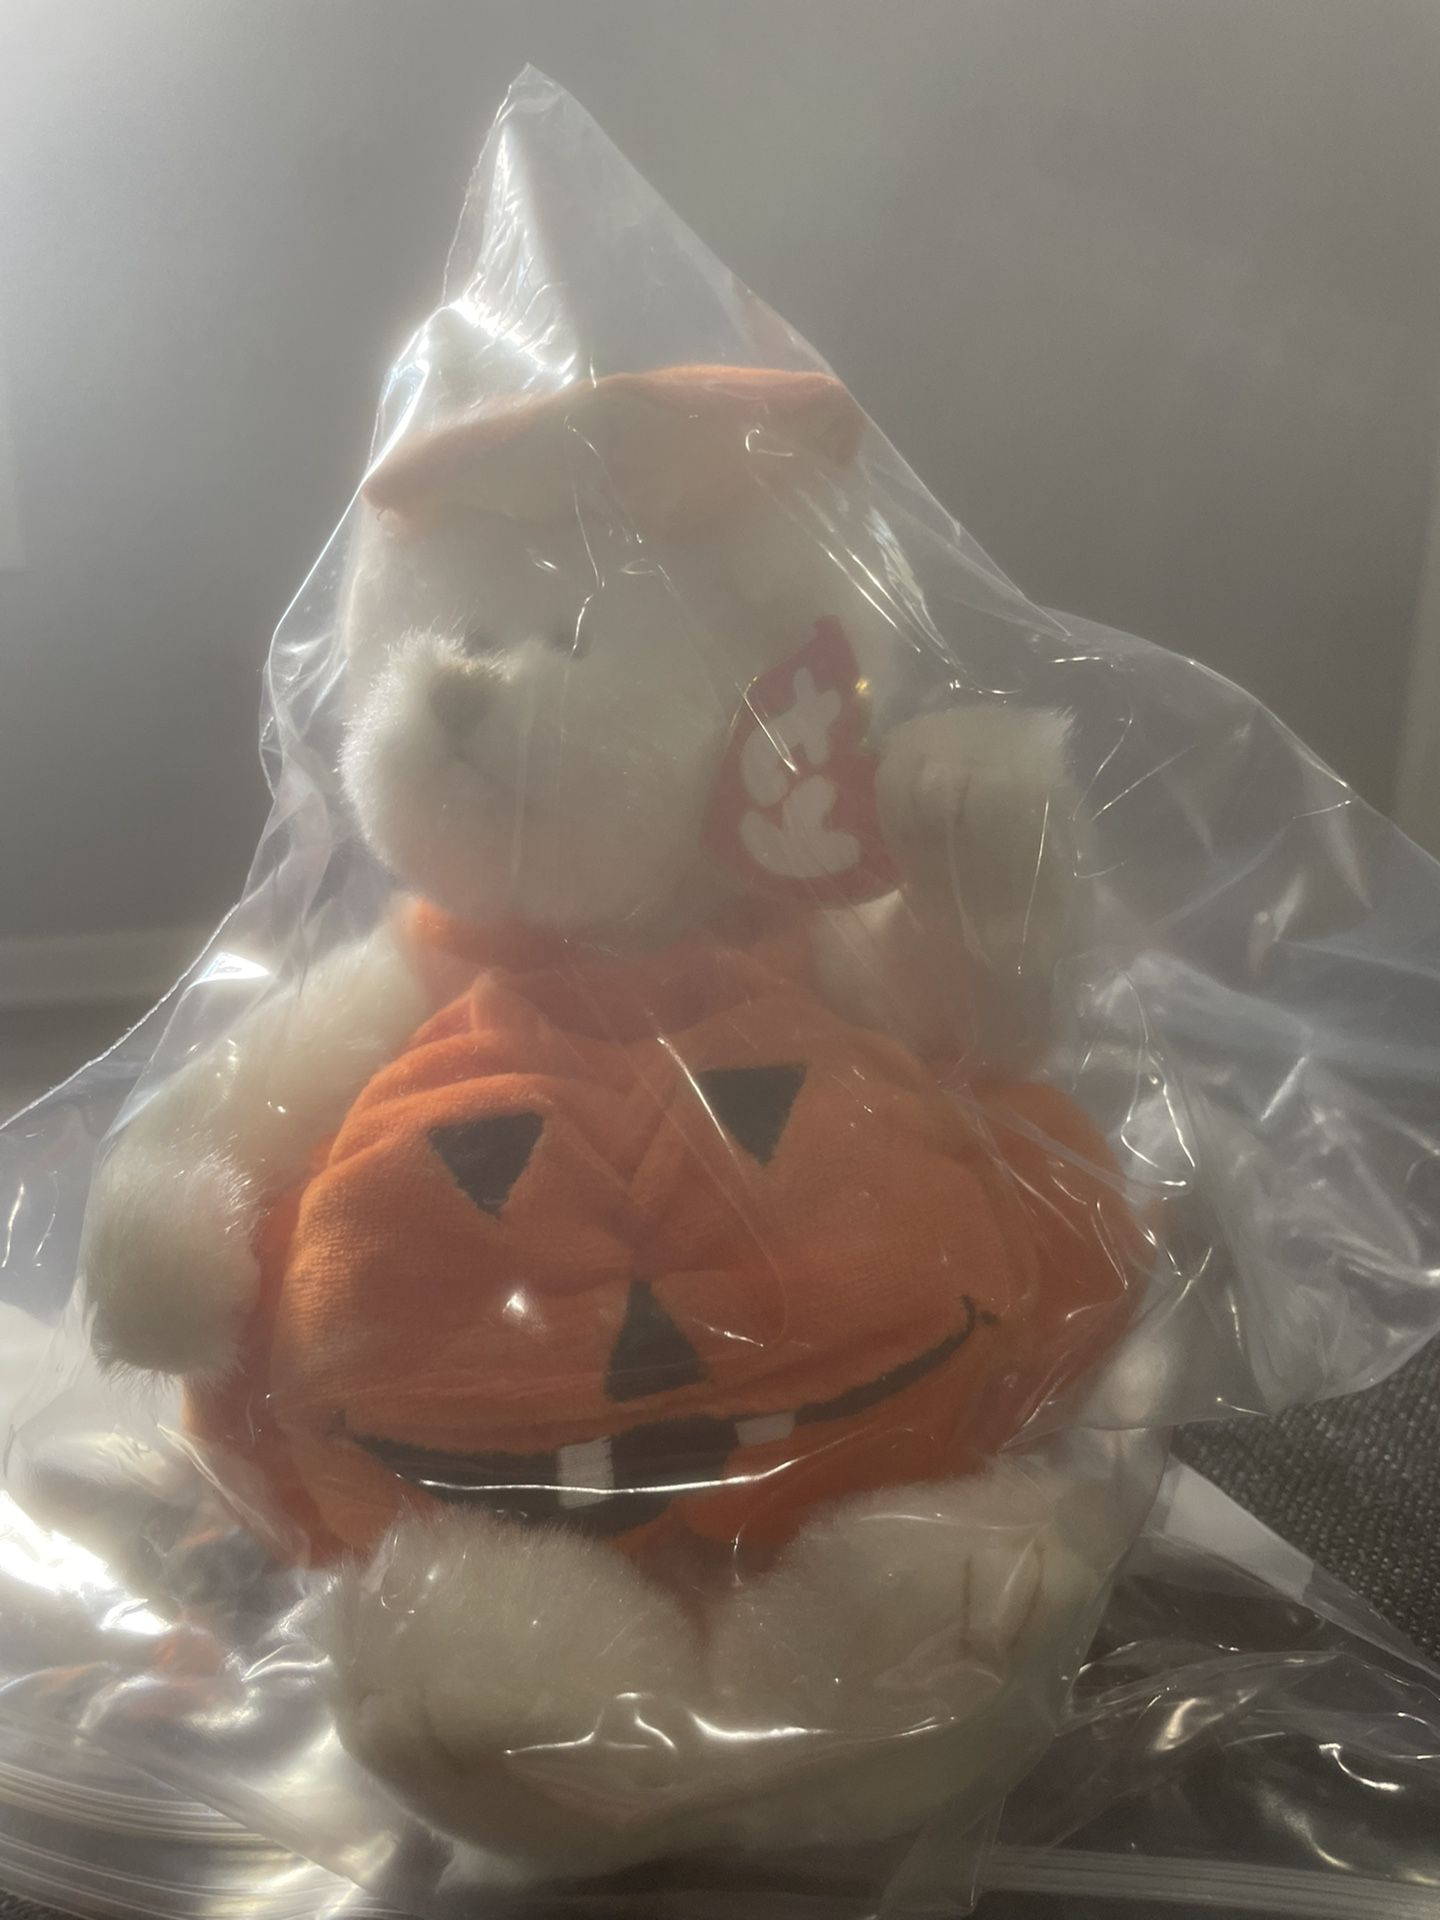 Beanie Baby “Carver” 2000 Attic Collection